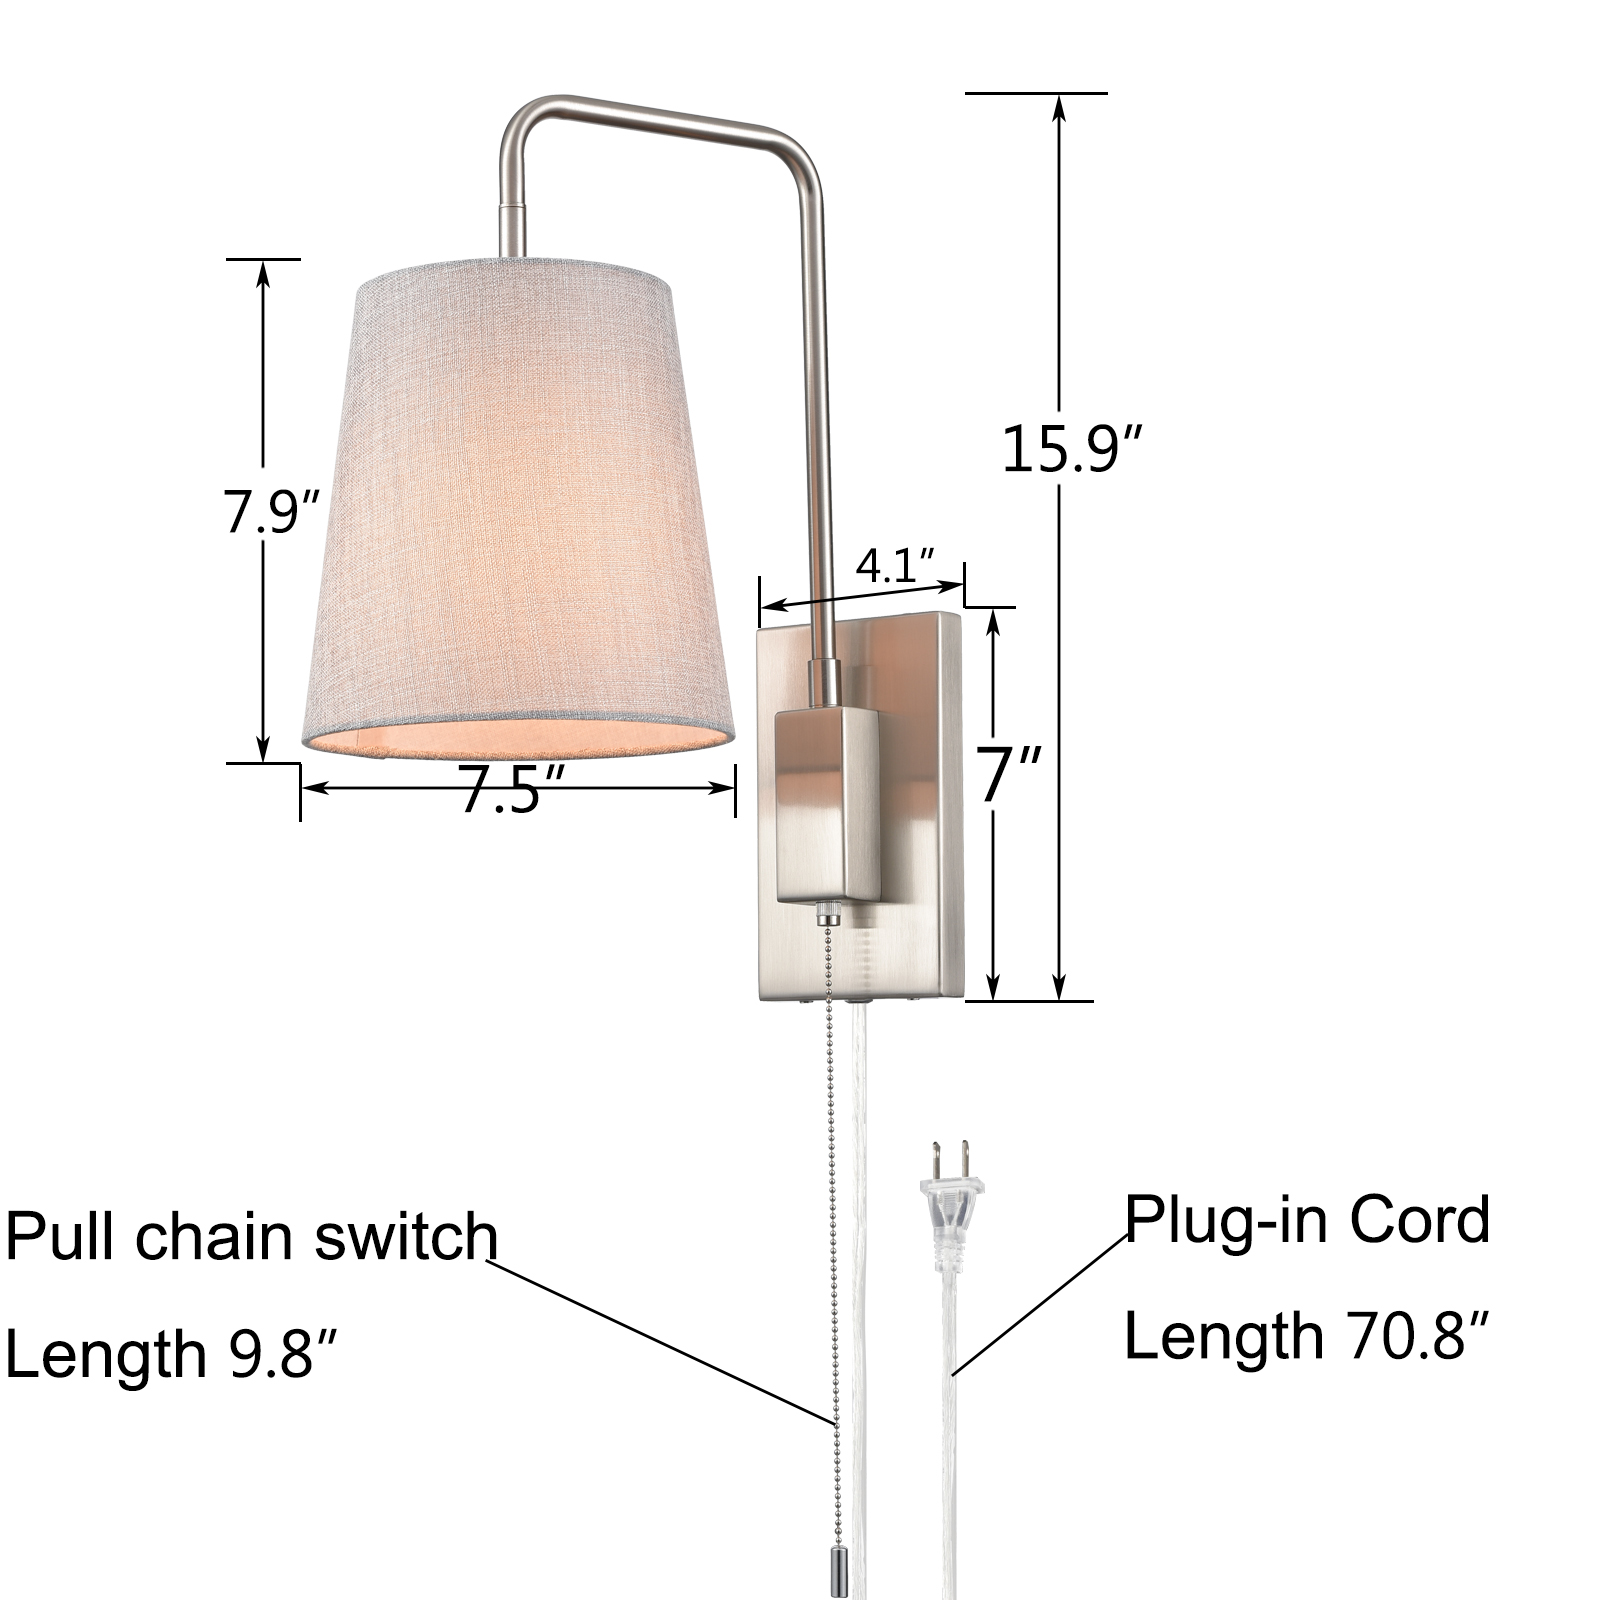 Fabric Shade Plug in Wall Sconce 2 Pack Brushed Nickel Wall Lamps